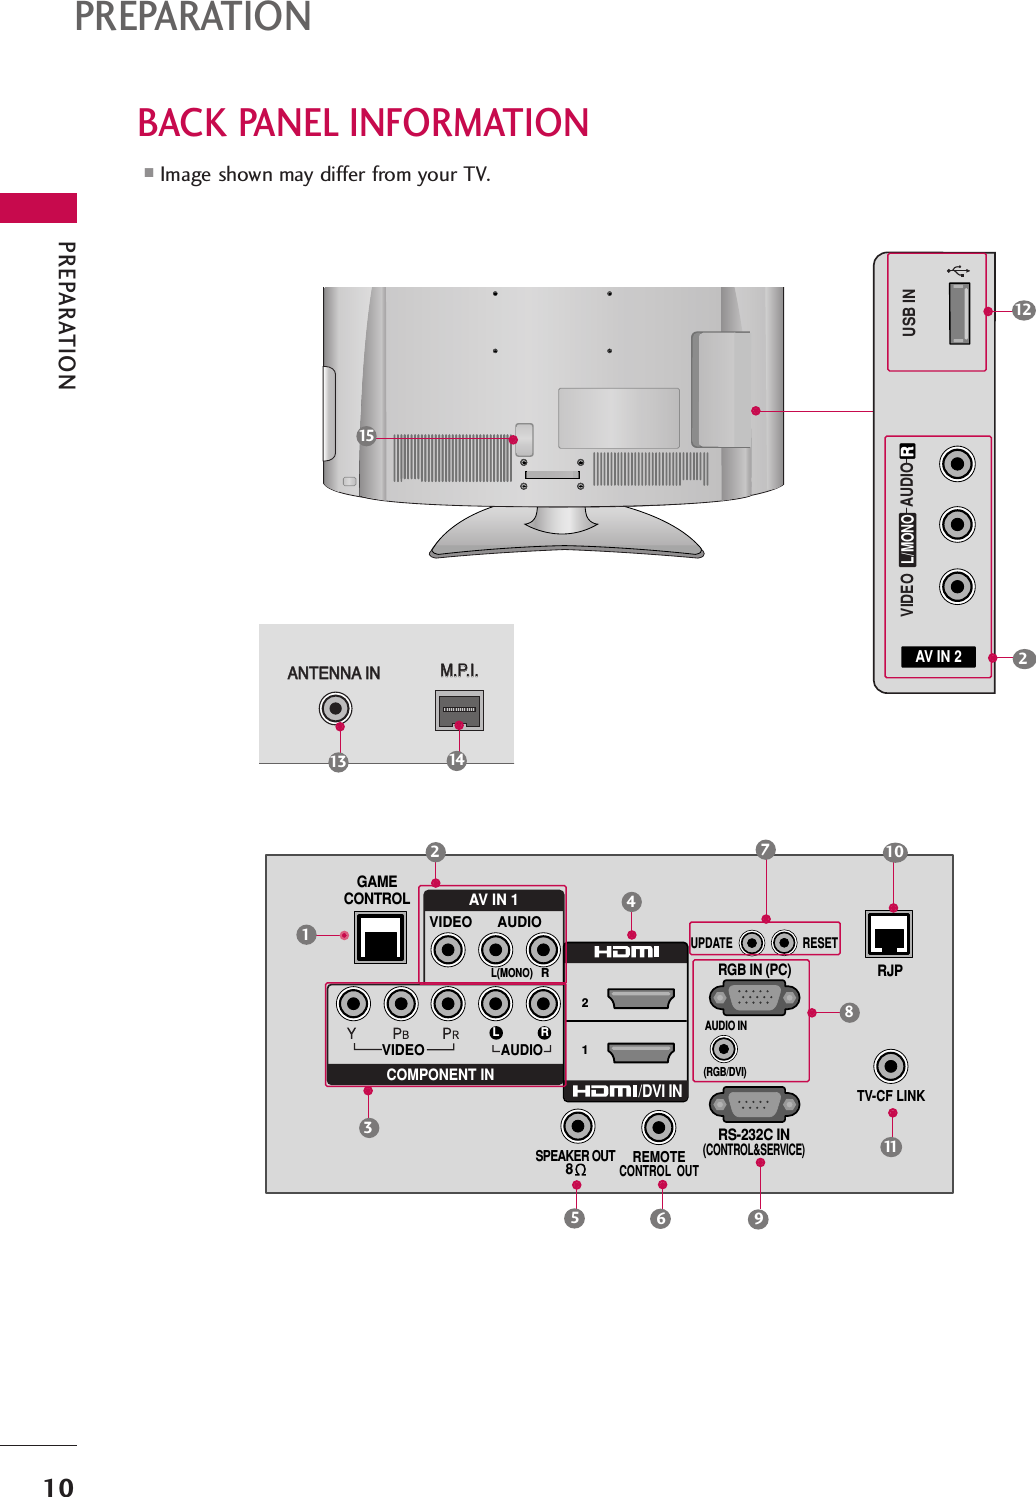 PREPARATION10■Image shown may differ from your TV.BACK PANEL INFORMATIONAV IN 2L/MONORAUDIOVIDEOUSB INRS-232C IN(CONTROL&amp;SERVICE)AUDIO INVIDEOAUDIORGB IN (PC)VIDEO AUDIOL(MONO)R21L R/DVI INCOMPONENT INAV IN 1UPDATERESET(RGB/DVI)REMOTECONTROL  OUTSPEAKER OUT8RJPTV-CF LINKGAMECONTROLR8210R(            )ANTENNA INANTENNA INM.P.I.M.P.I.714356121315142PREPARATION911